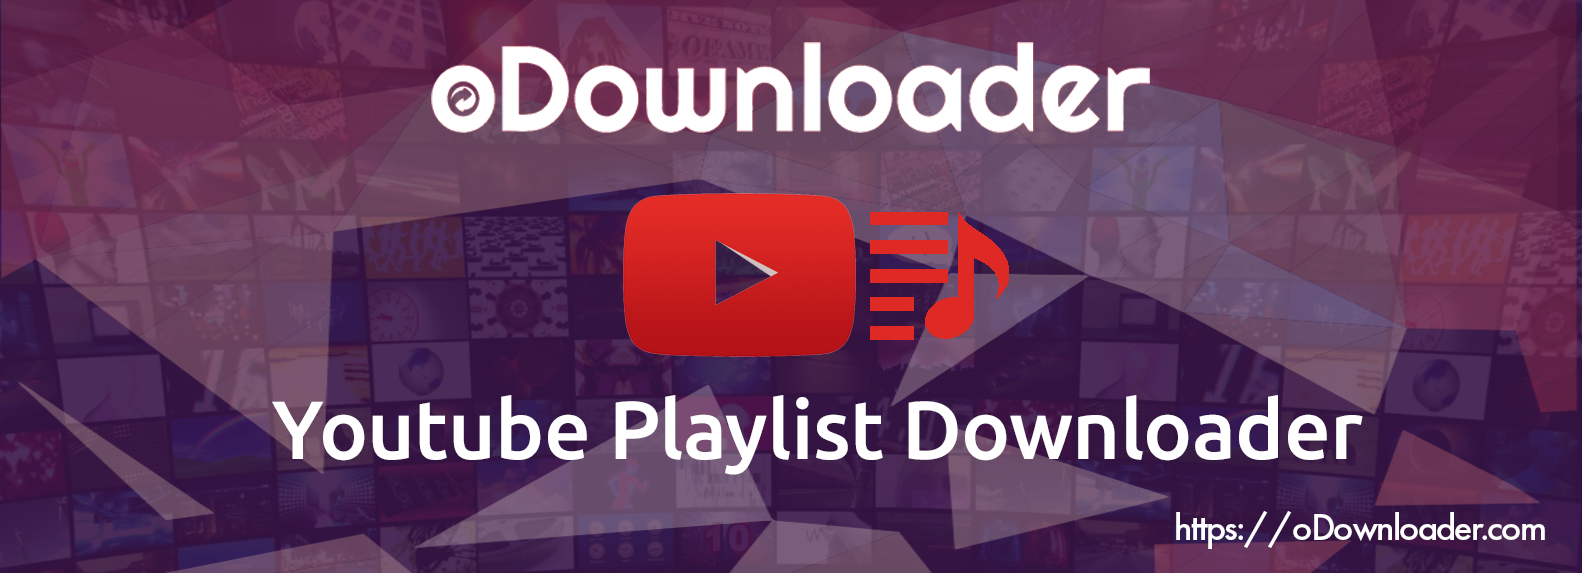 youtube playlist download mp3 online free